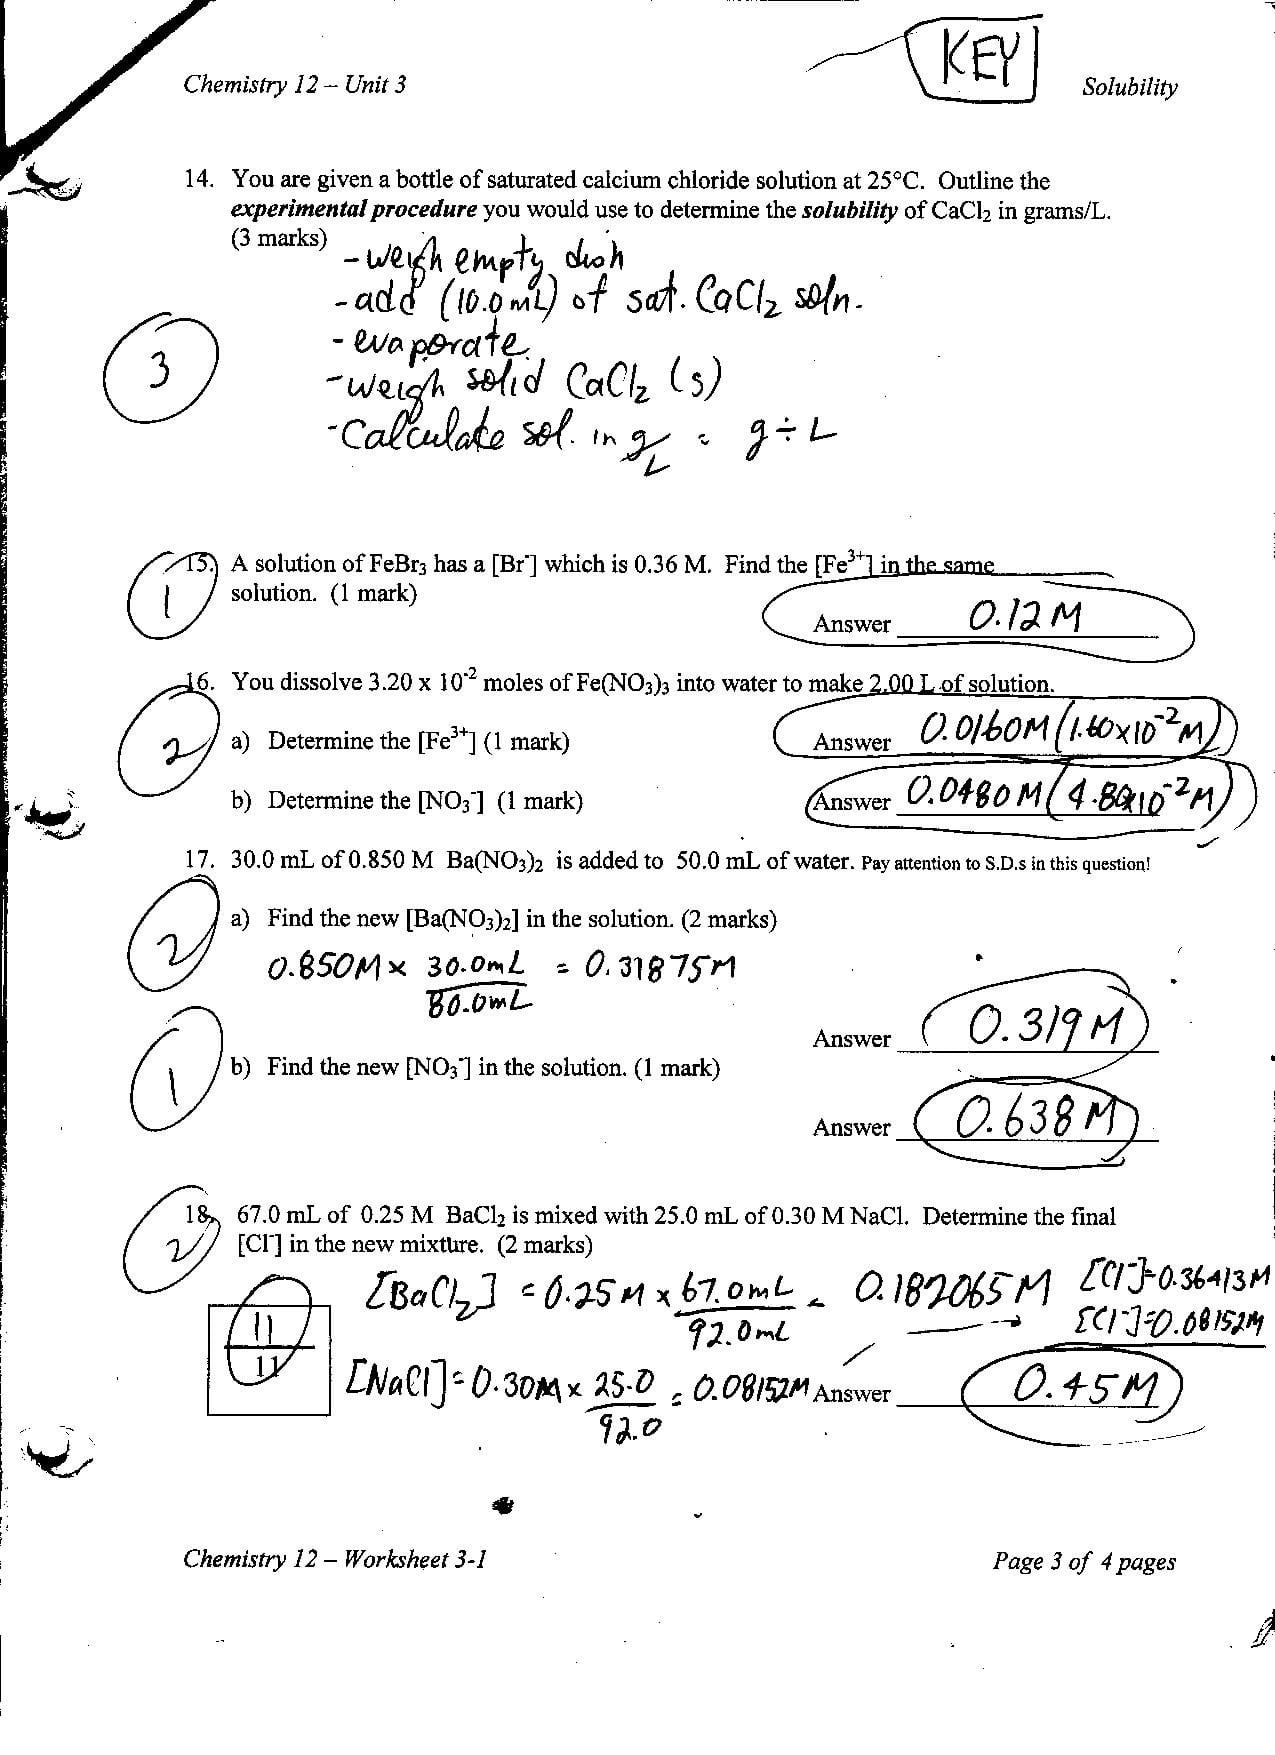 Chemistry 12 Pertaining To Chemistry Unit 4 Worksheet 2 Answers